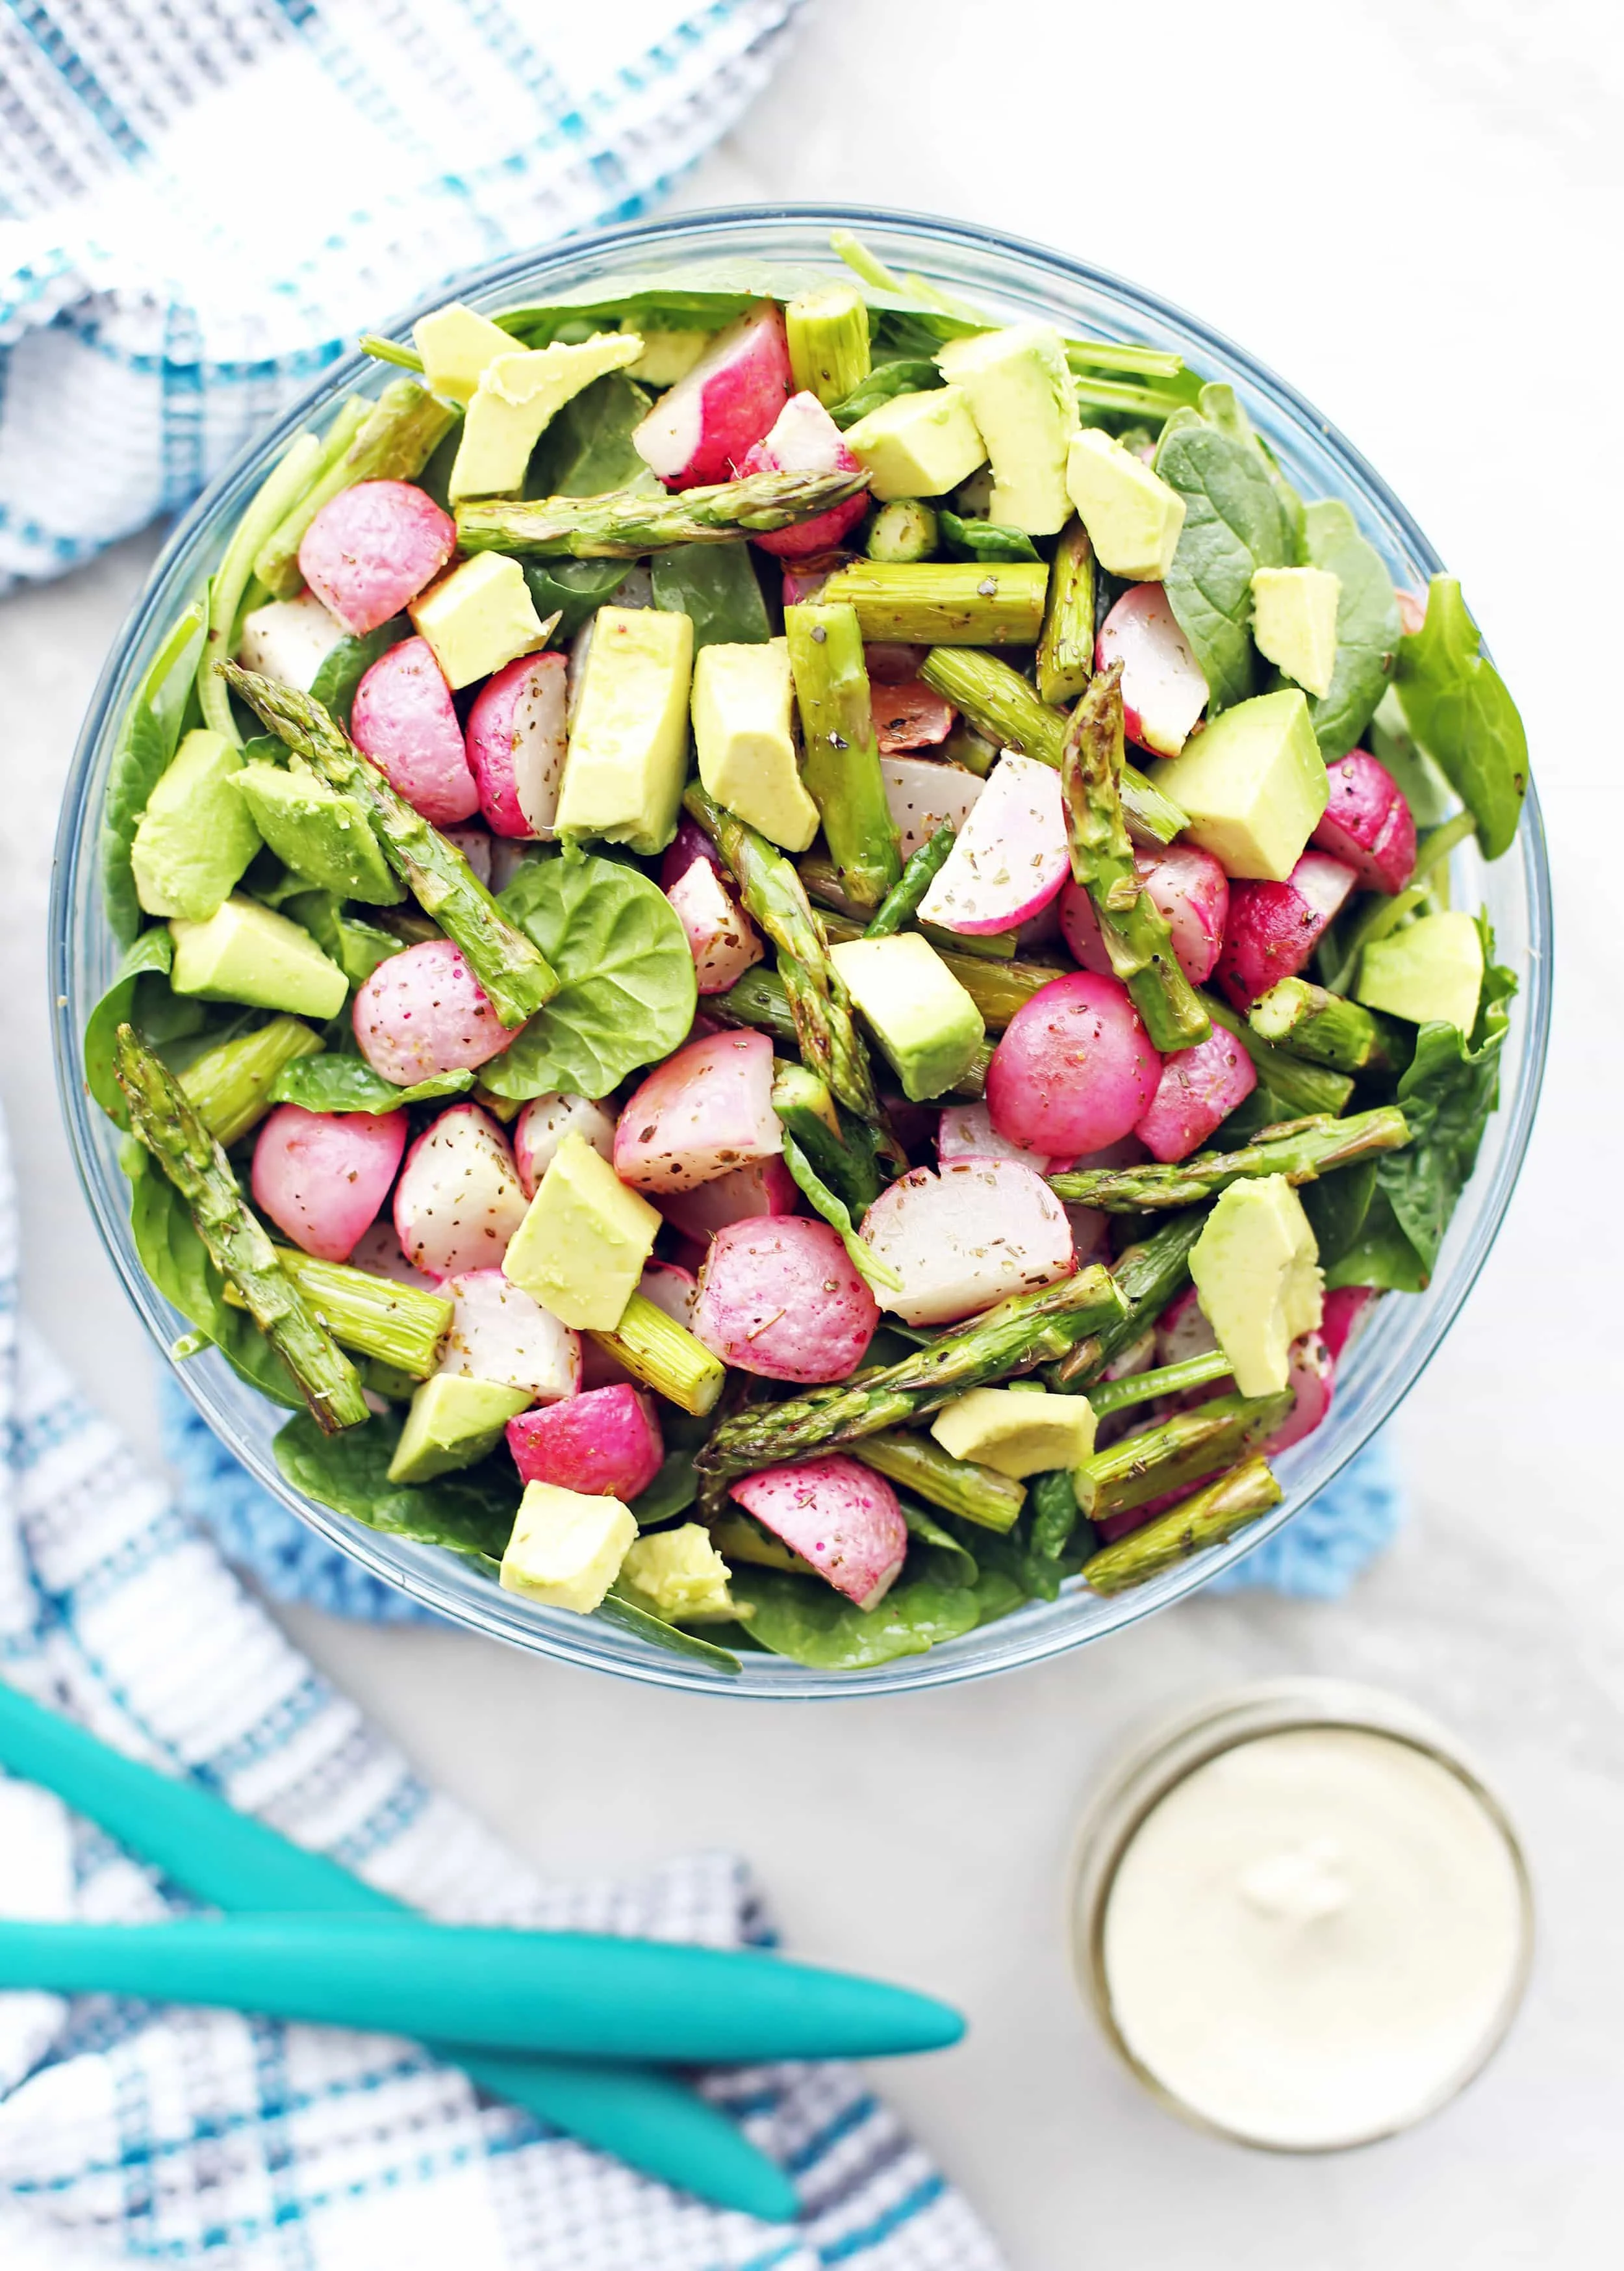 Overhead view of Roasted Asparagus and Radish Salad with spinach and avocado in a large glass bowl.